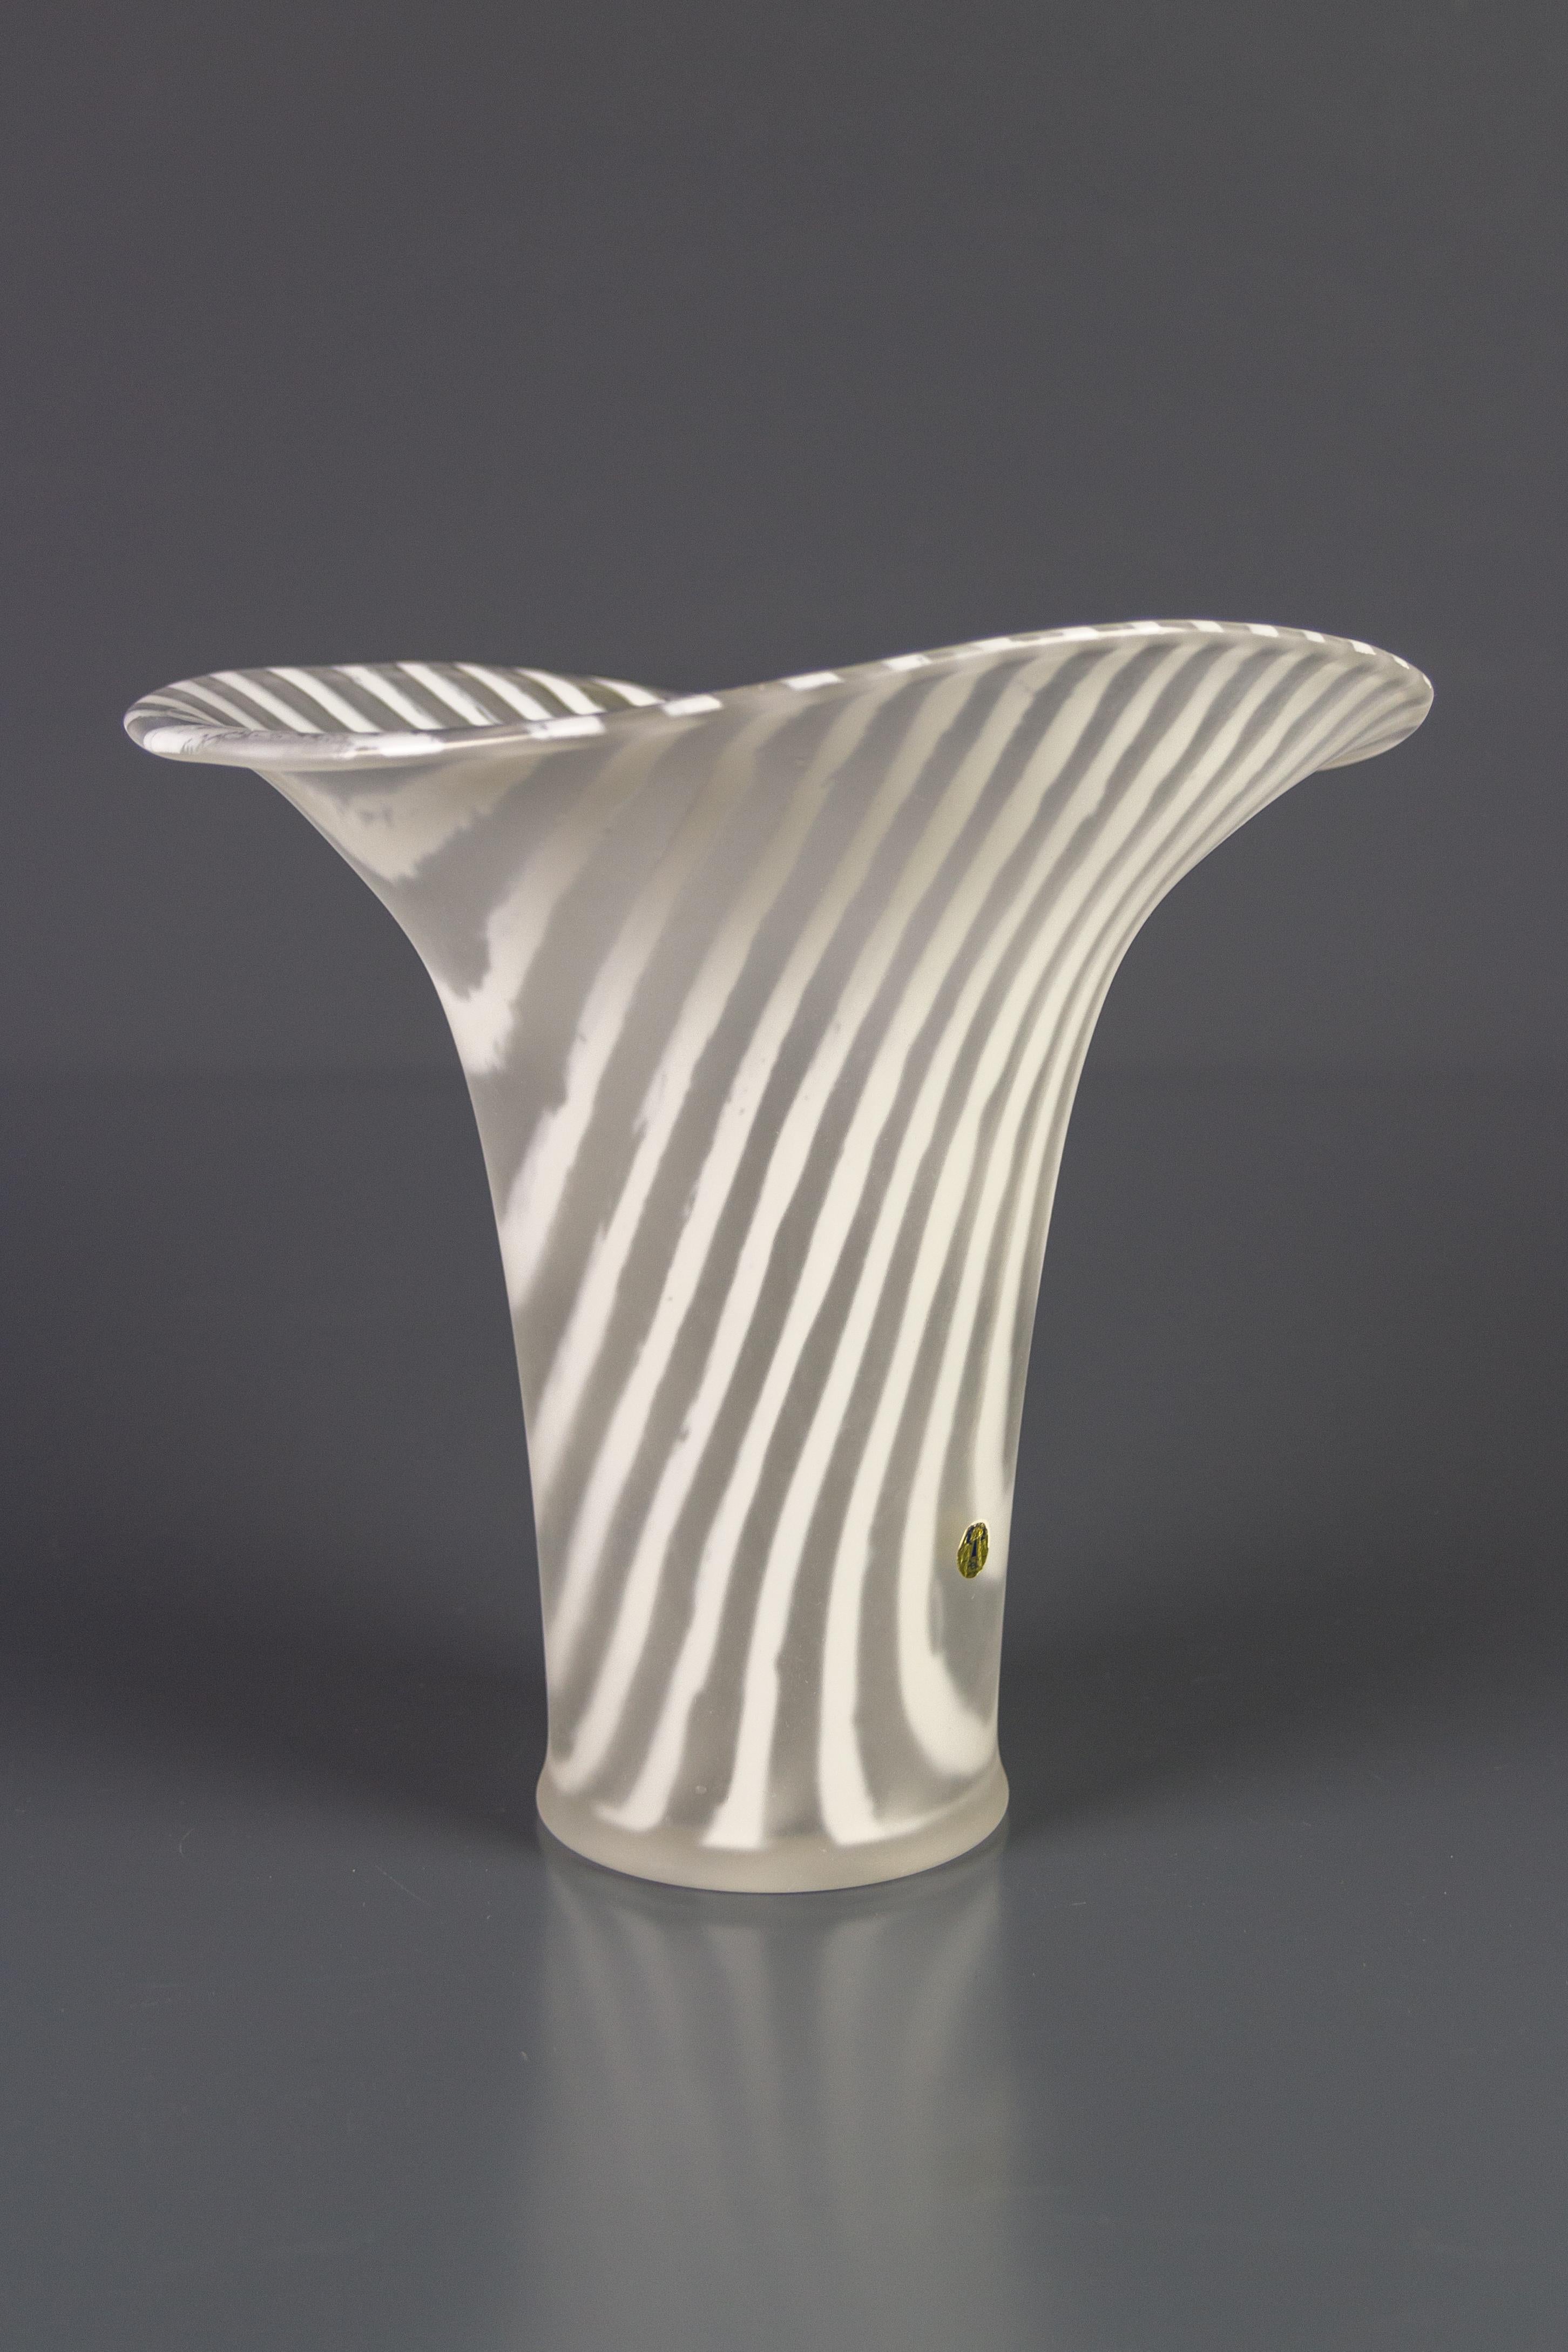 Beautifully shaped Zebra Kenya design glass vase by Peill & Putzler, Germany, 1970s. The finely frosted outside finish is beautifully contrasted by the glossy glass of the inside surface.
Dimensions: height: 26 cm / 10.23 in; diameter: 28 cm /